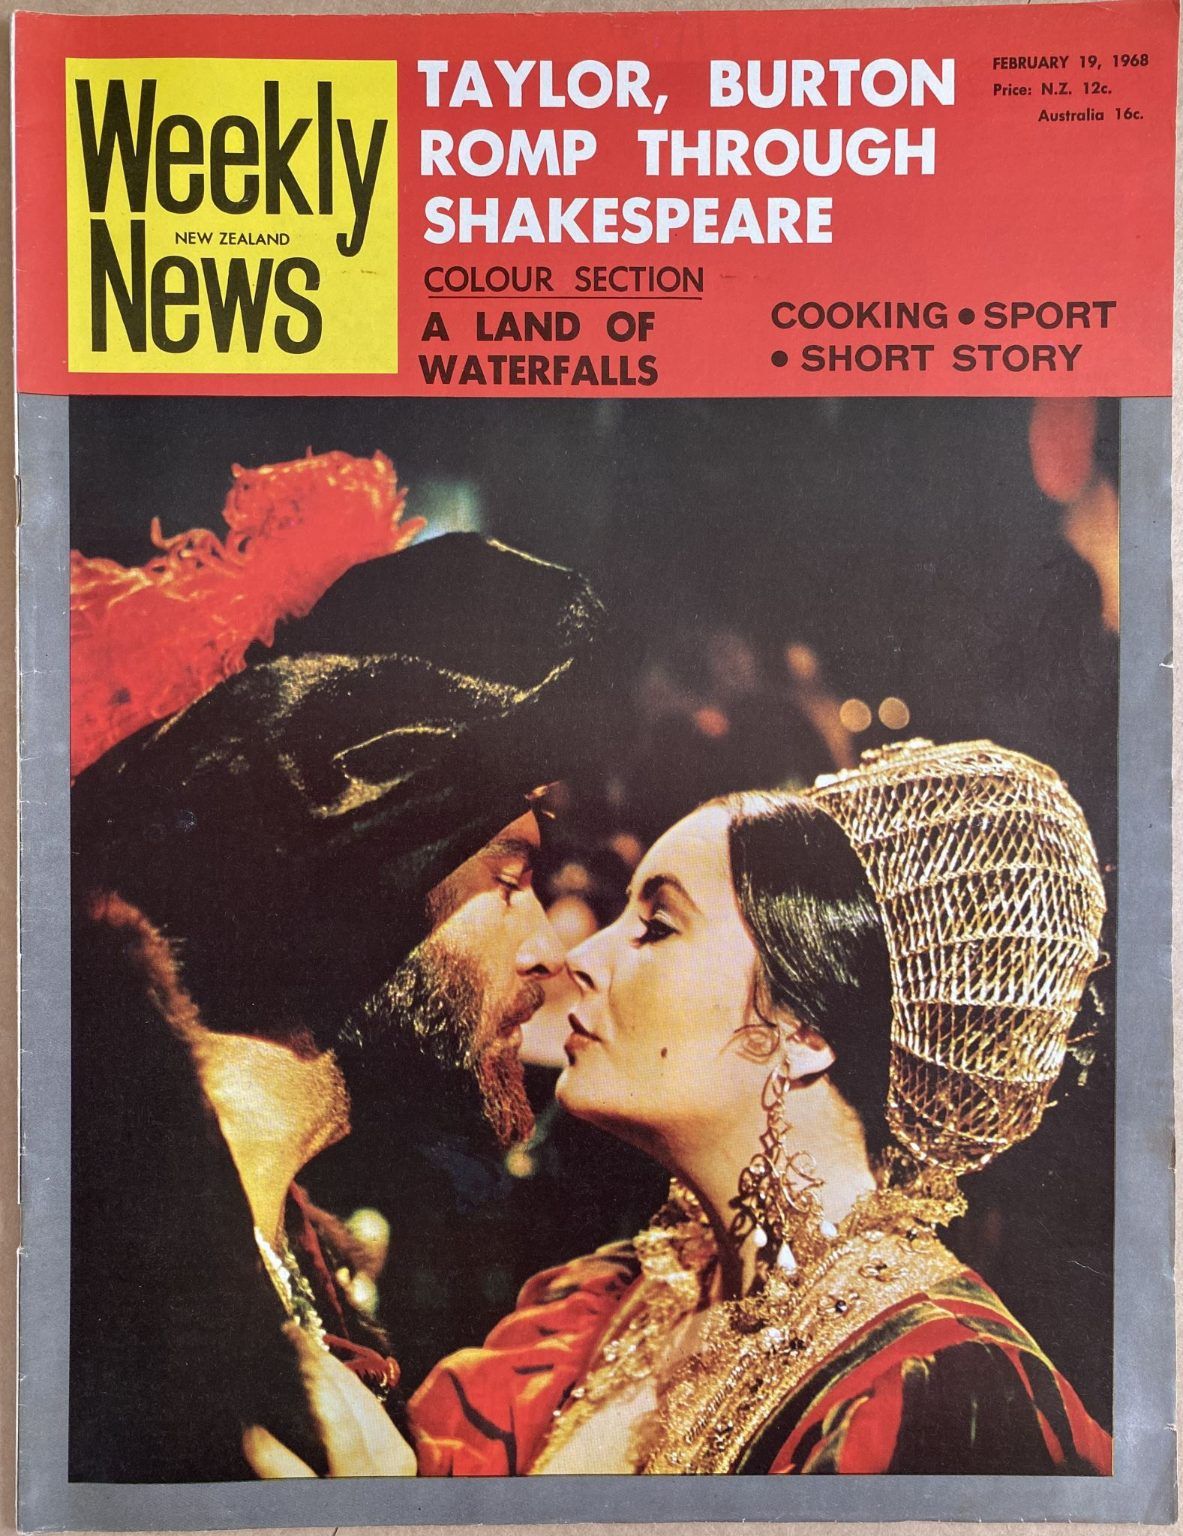 OLD NEWSPAPER: New Zealand Weekly News, No. 5438, 19 February 1968